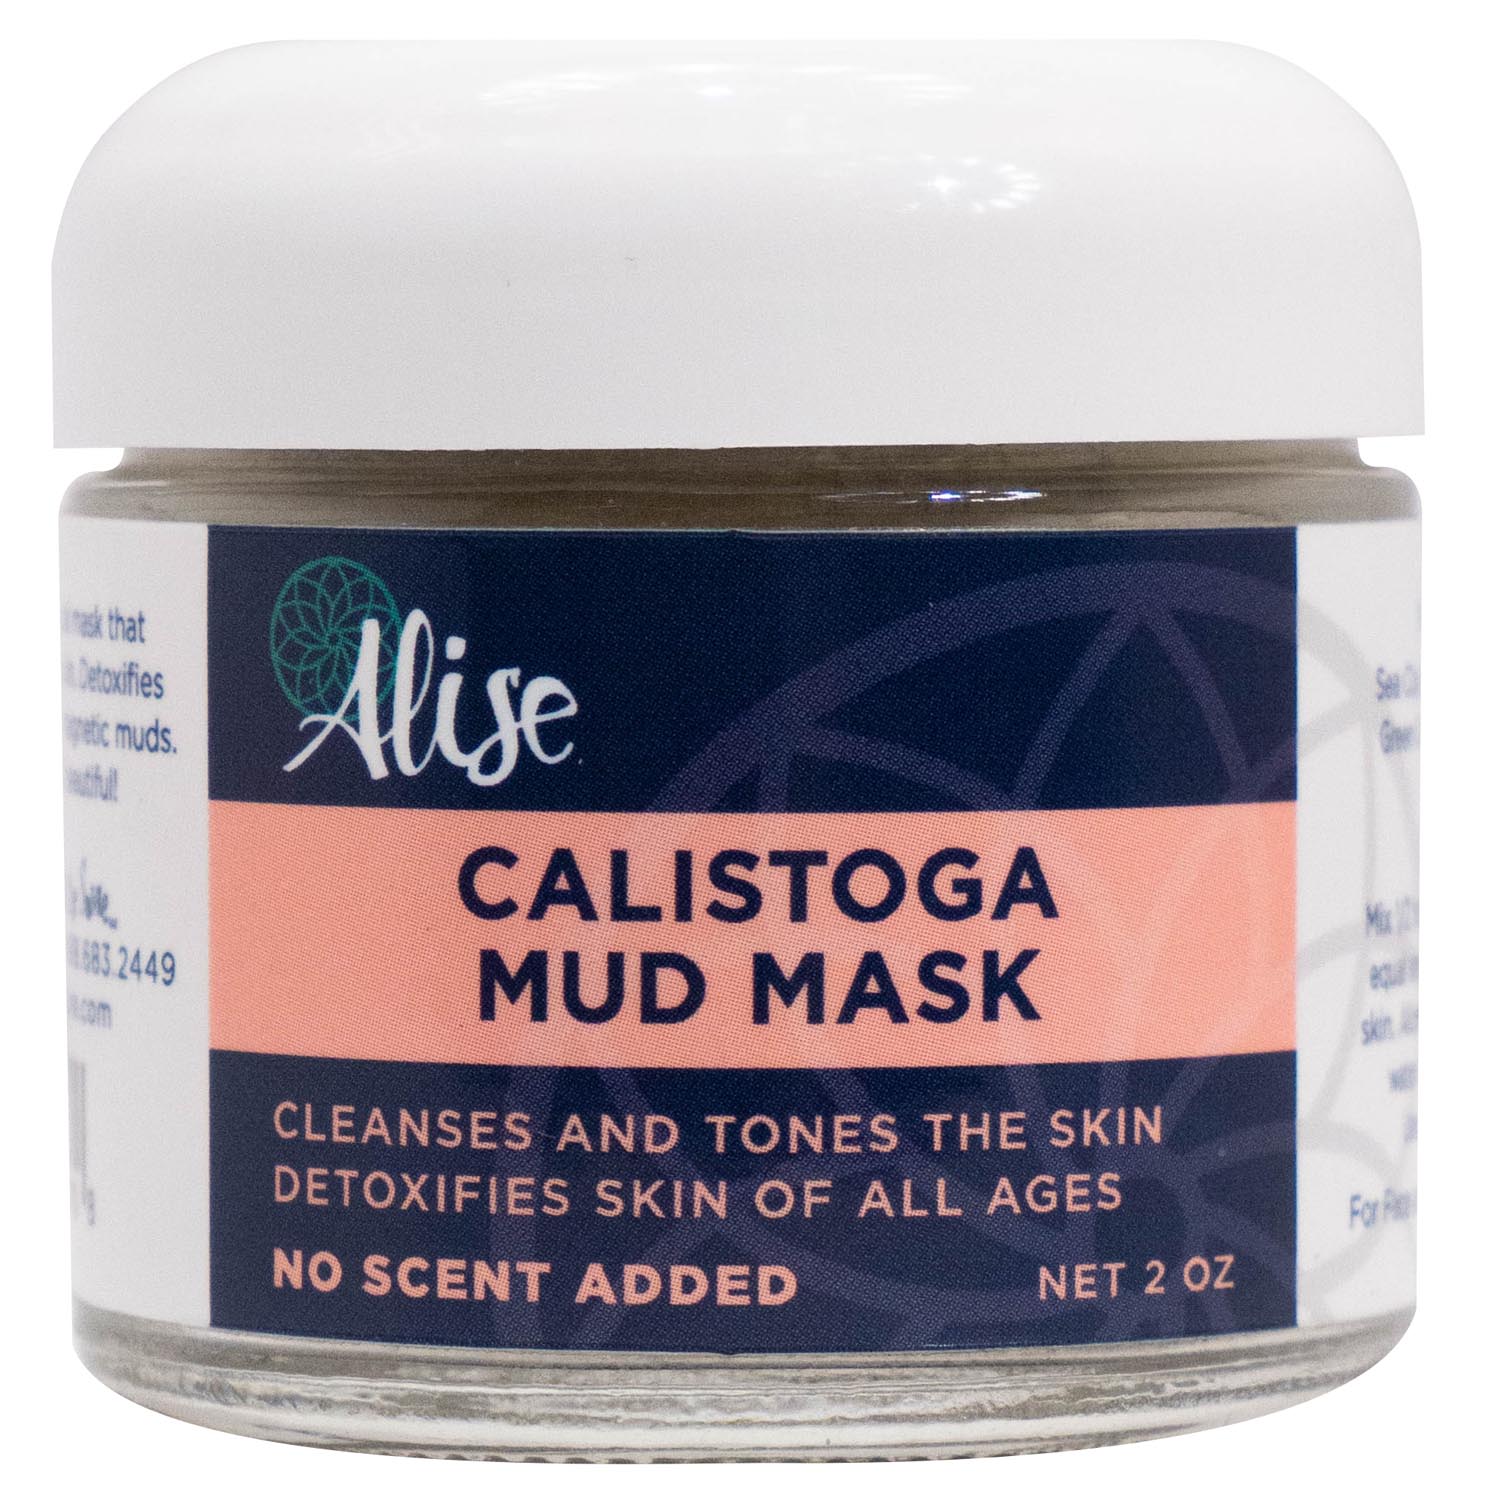 Calistoga Mud Mask 2oz handcrafted by Alise Body Care